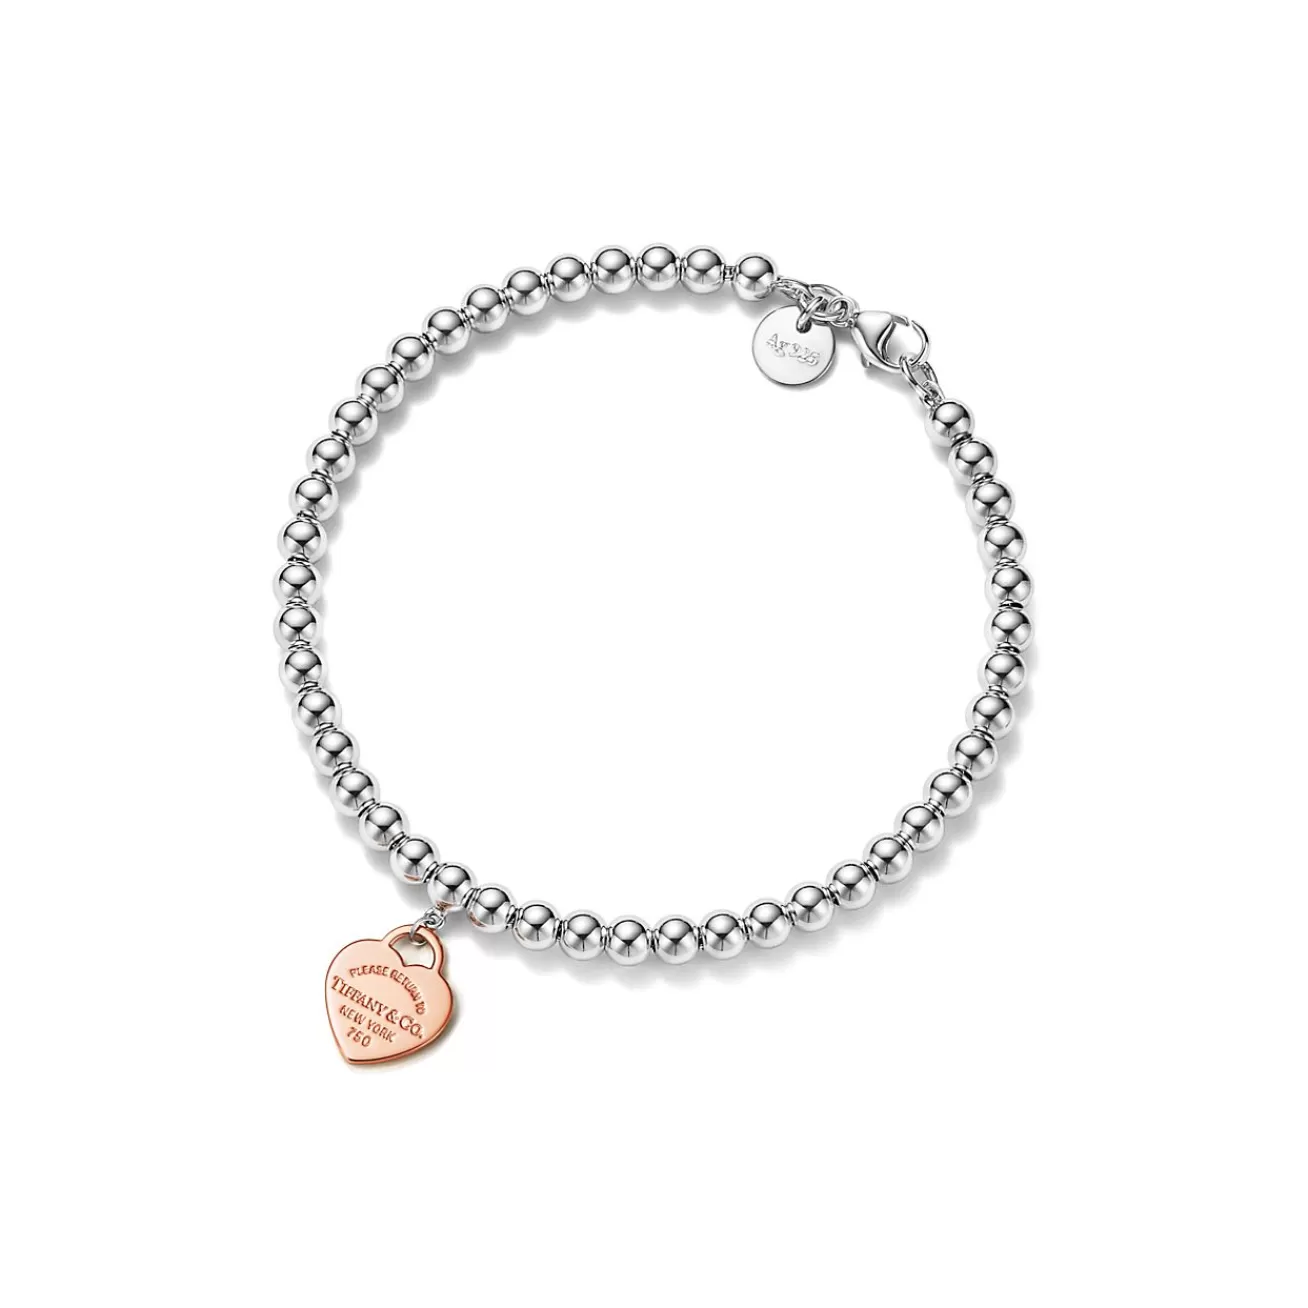 Tiffany & Co. Return to Tiffany® Heart Tag Bead Bracelet in Silver and Rose Gold, 4 mm | ^ Bracelets | Rose Gold Jewelry